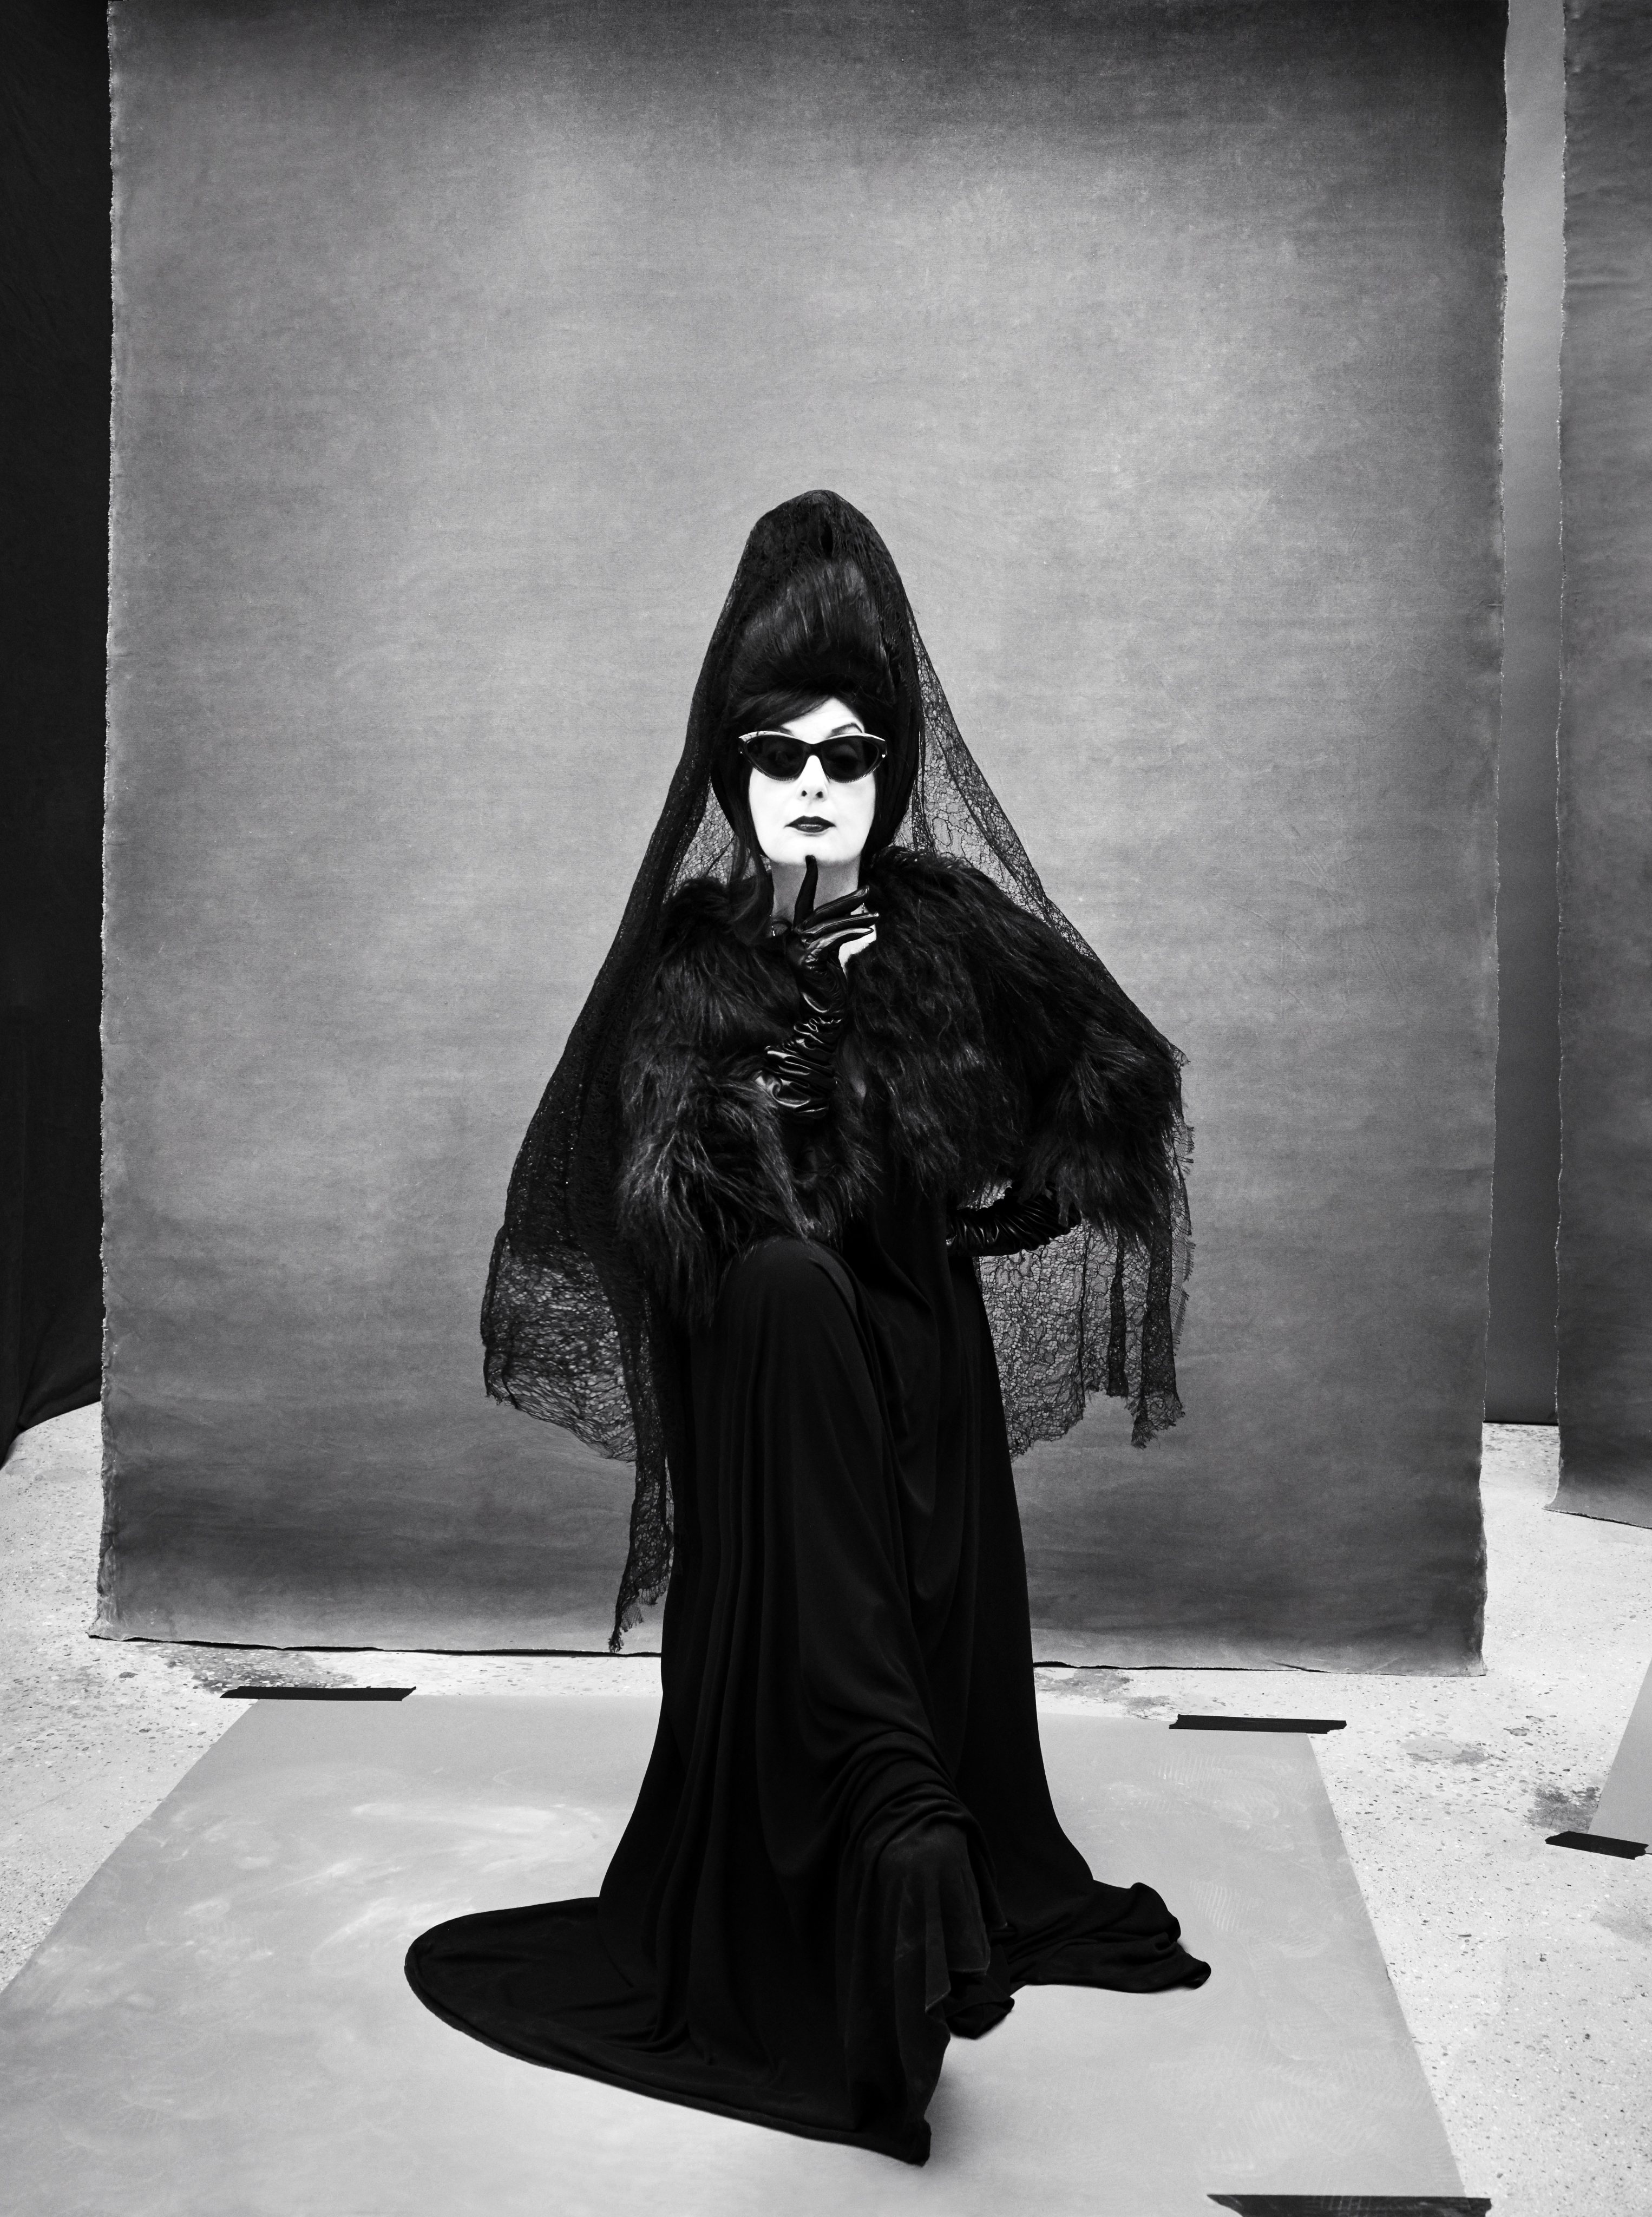 American fashion blogger Diane Pernet says the Chinese films included in her A Shaded View On Fashion Film festival reflect her long-standing collaborations with key figures in the country’s art scene. Photo: Ruven Afanador